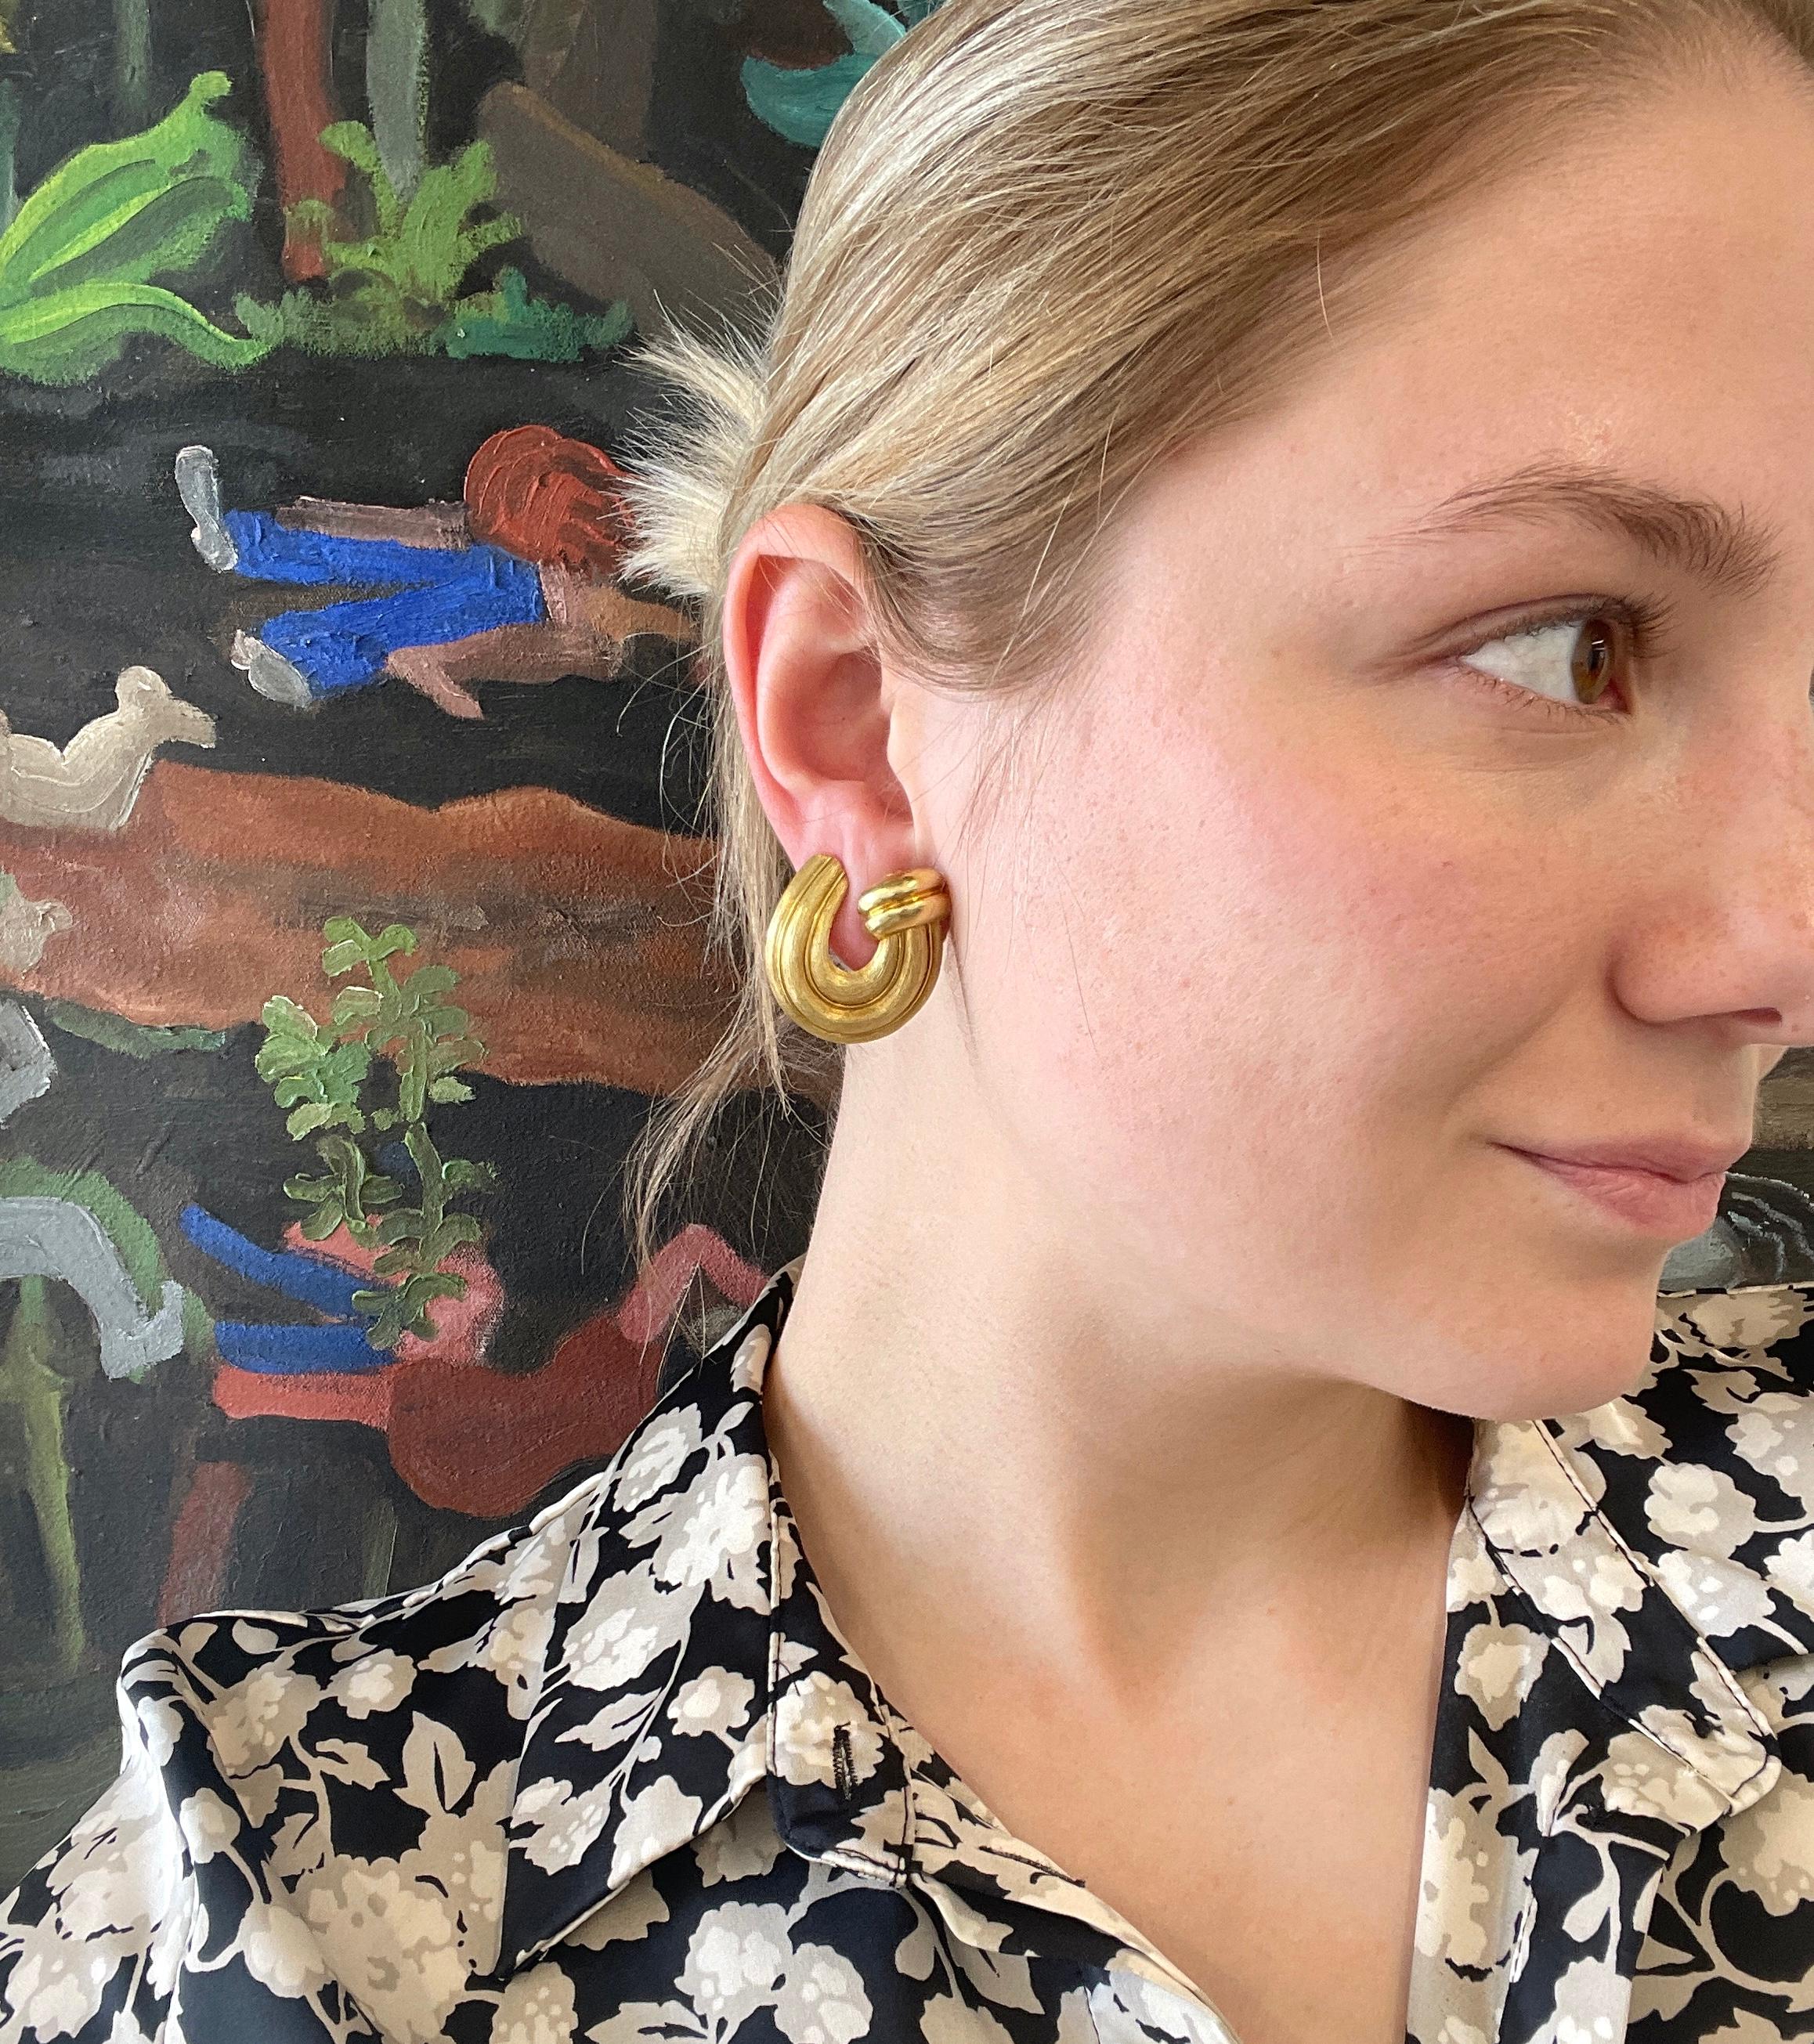 Solid, yellow gold jewelry has always been popular, but now it's trending even more. These are stunning and sophisticated Vintage Henry Dunay 18k Gold Earrings. Made in 18K yellow gold, these earrings are perfect to complete any outfit. Wear them